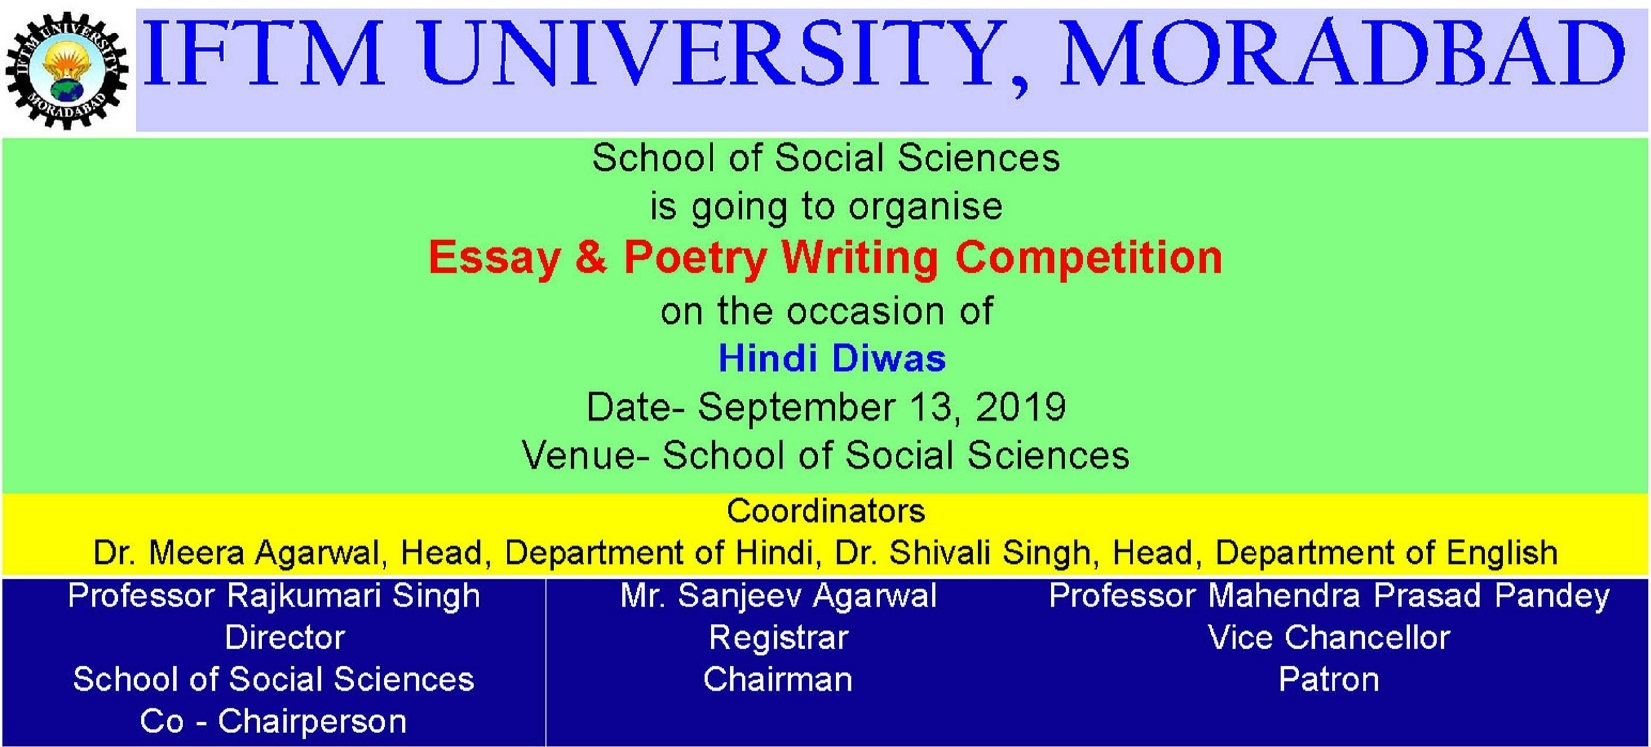 Essay and Poem Writing Competition on Importance of Hindi